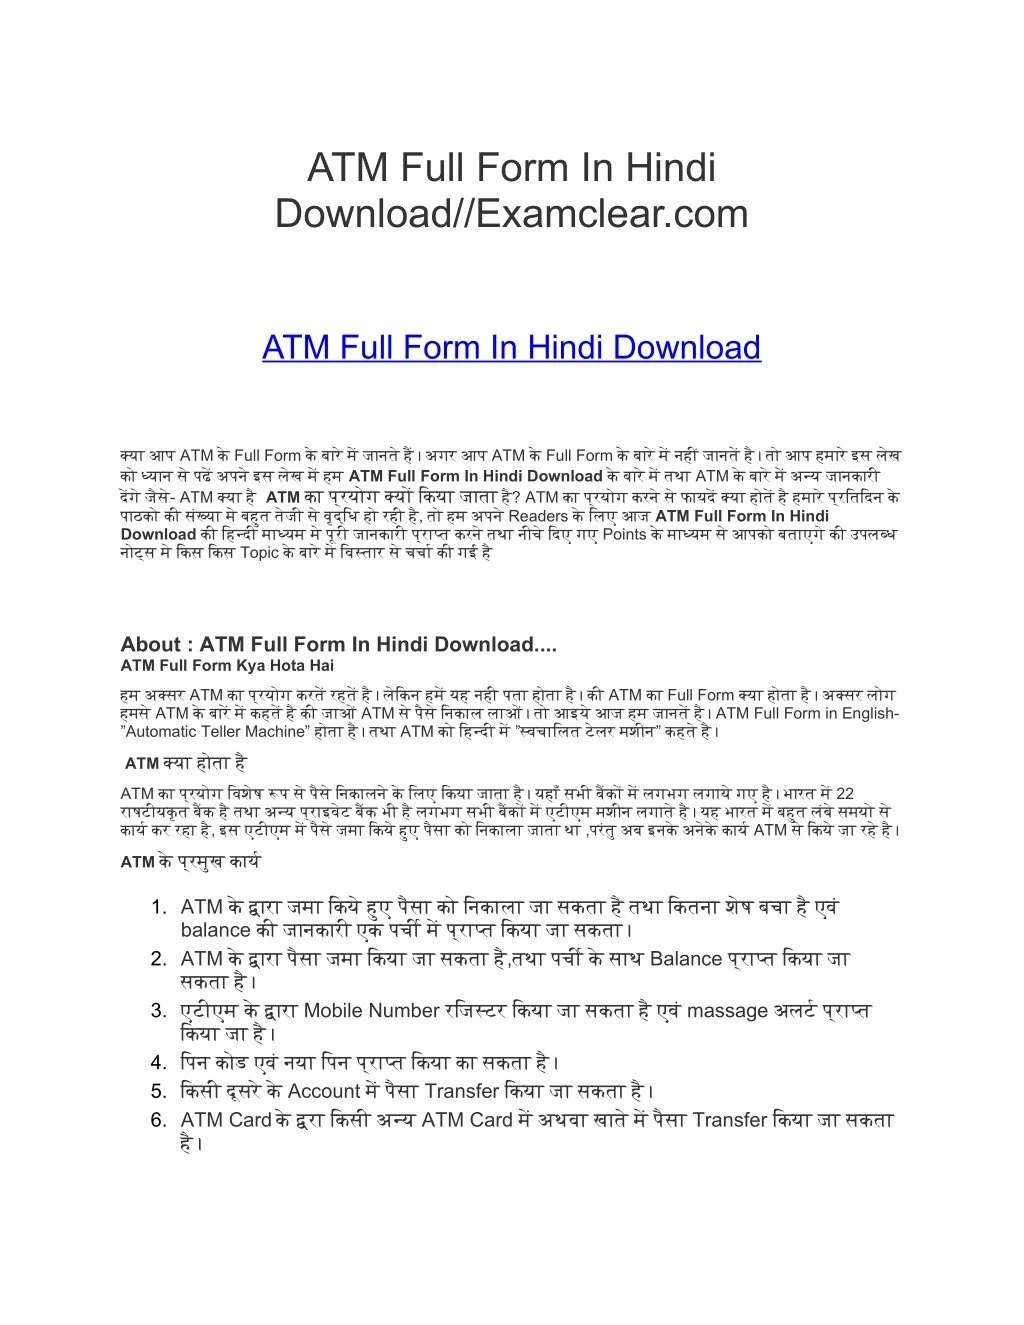 atm full form in hindi download examclear com